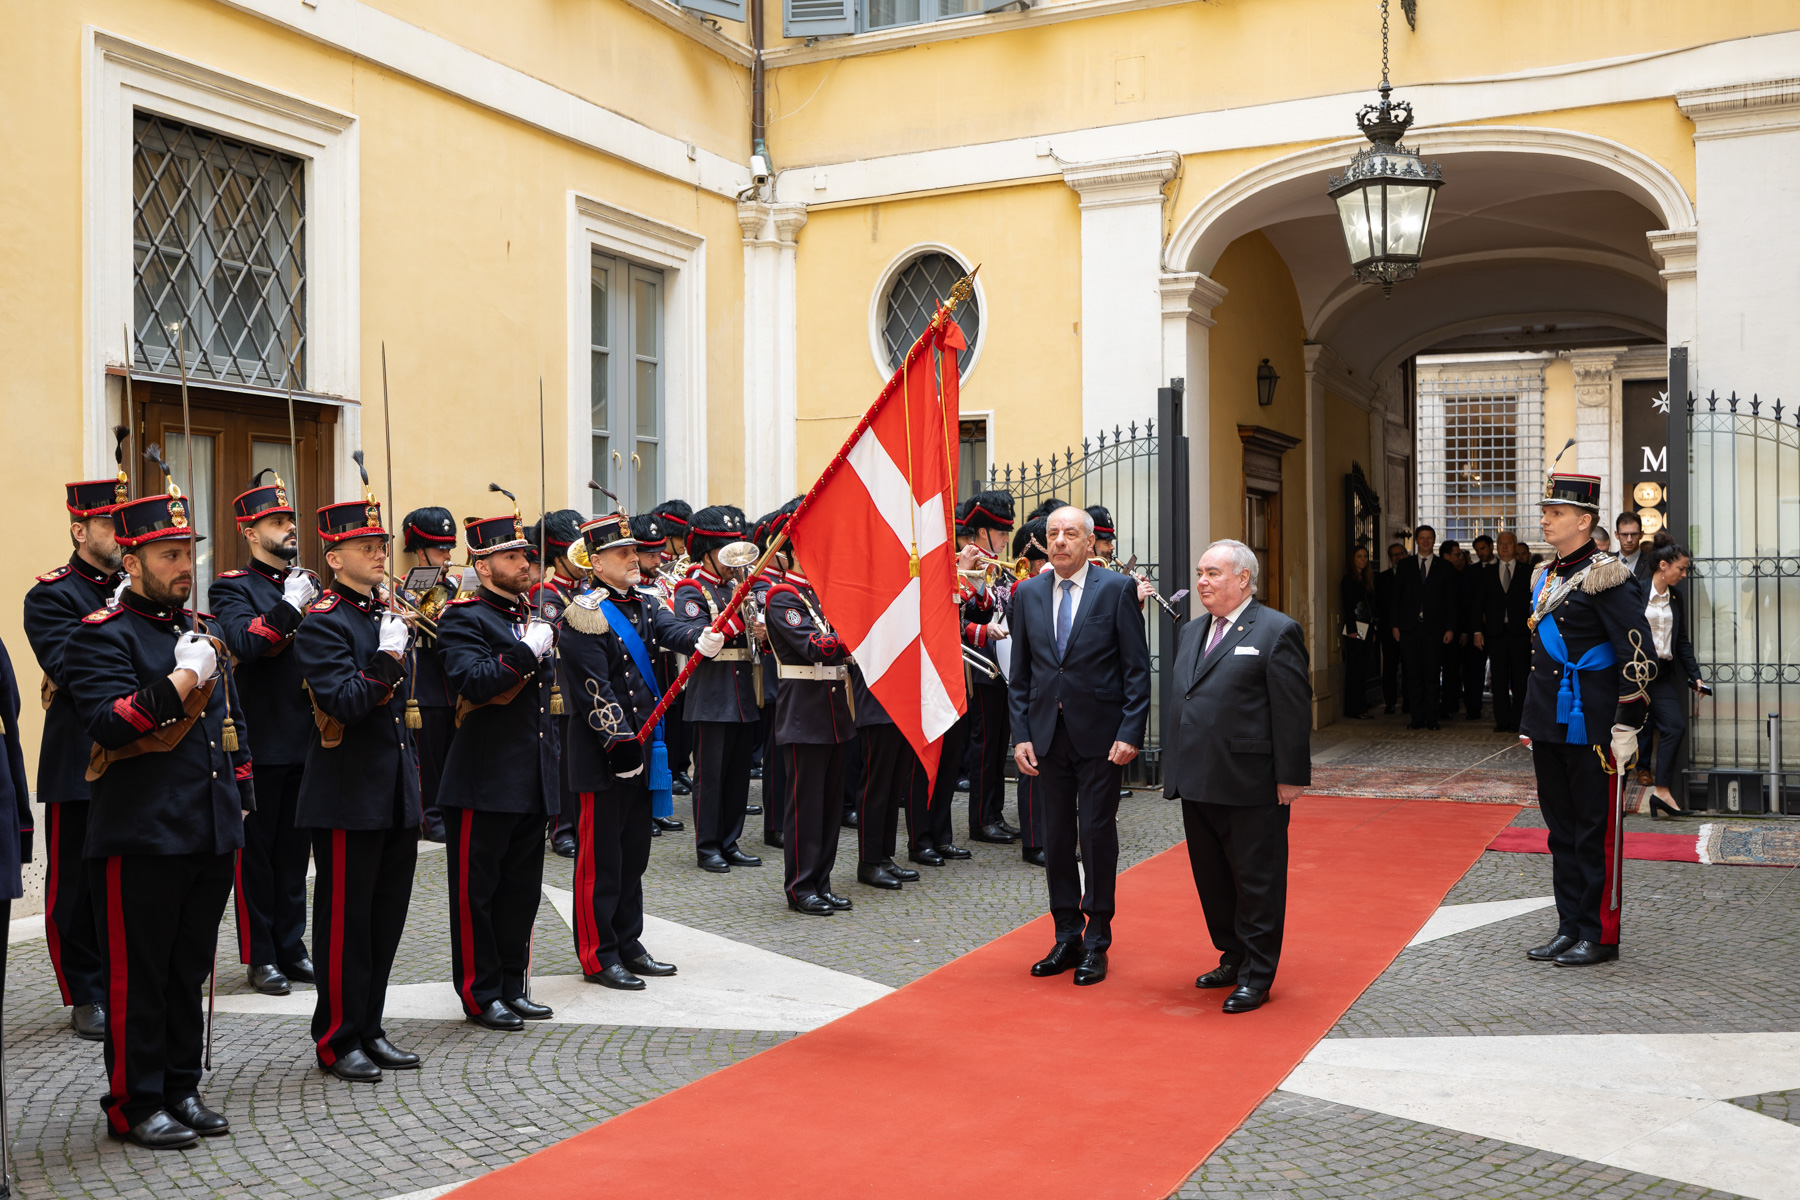 The President of the Republic pays an official visit to the Order of Malta